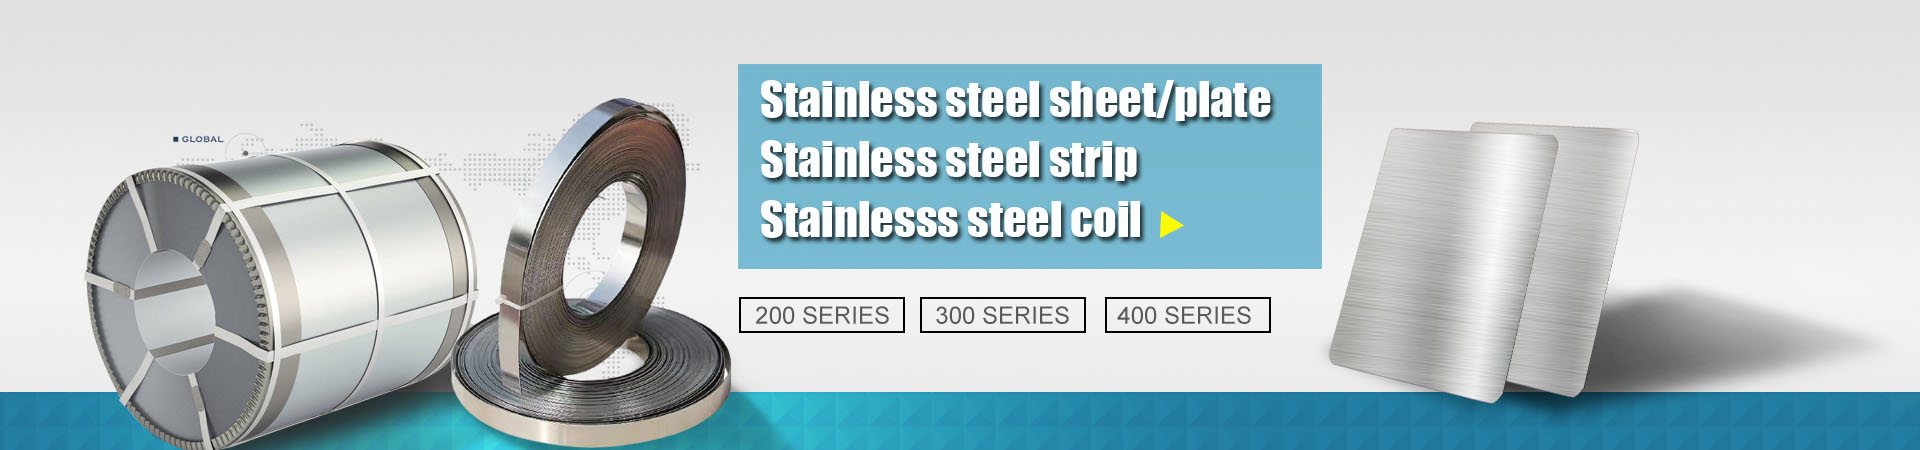 Stainless steel sheet/plate,Stainless steel strip,Stainless steel coil